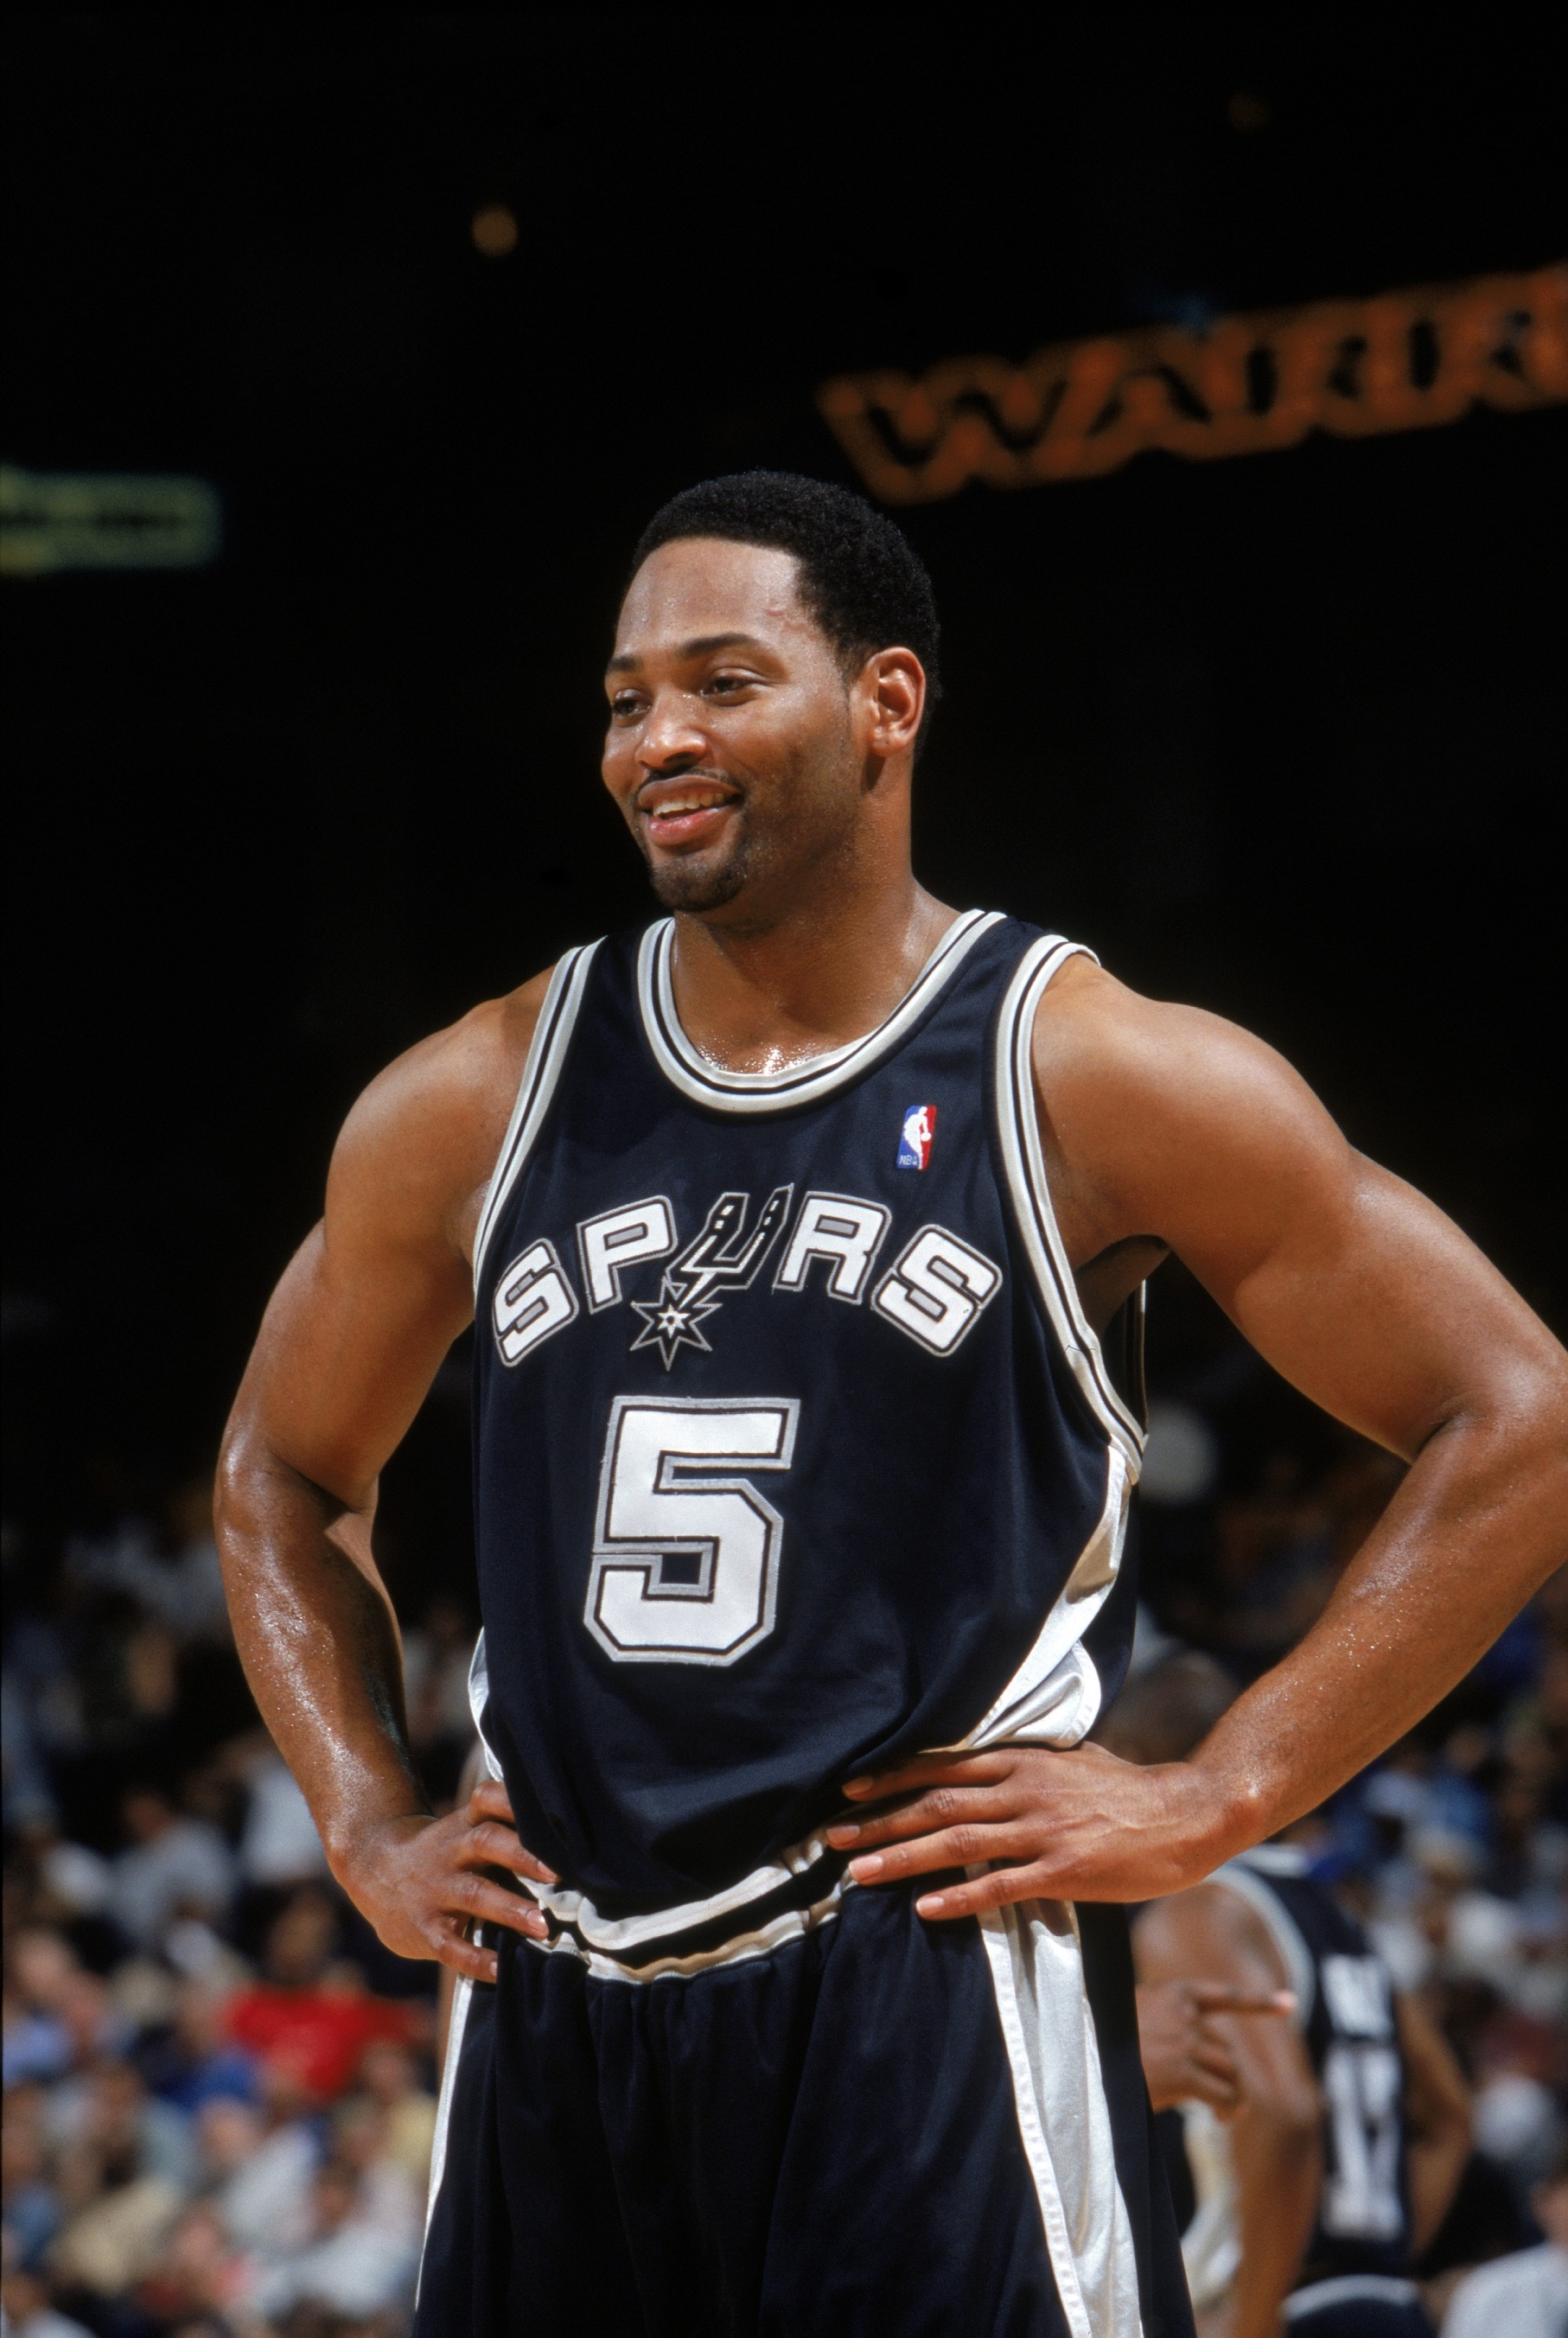 Seven time NBA chamipon Robert Horry set to visit India